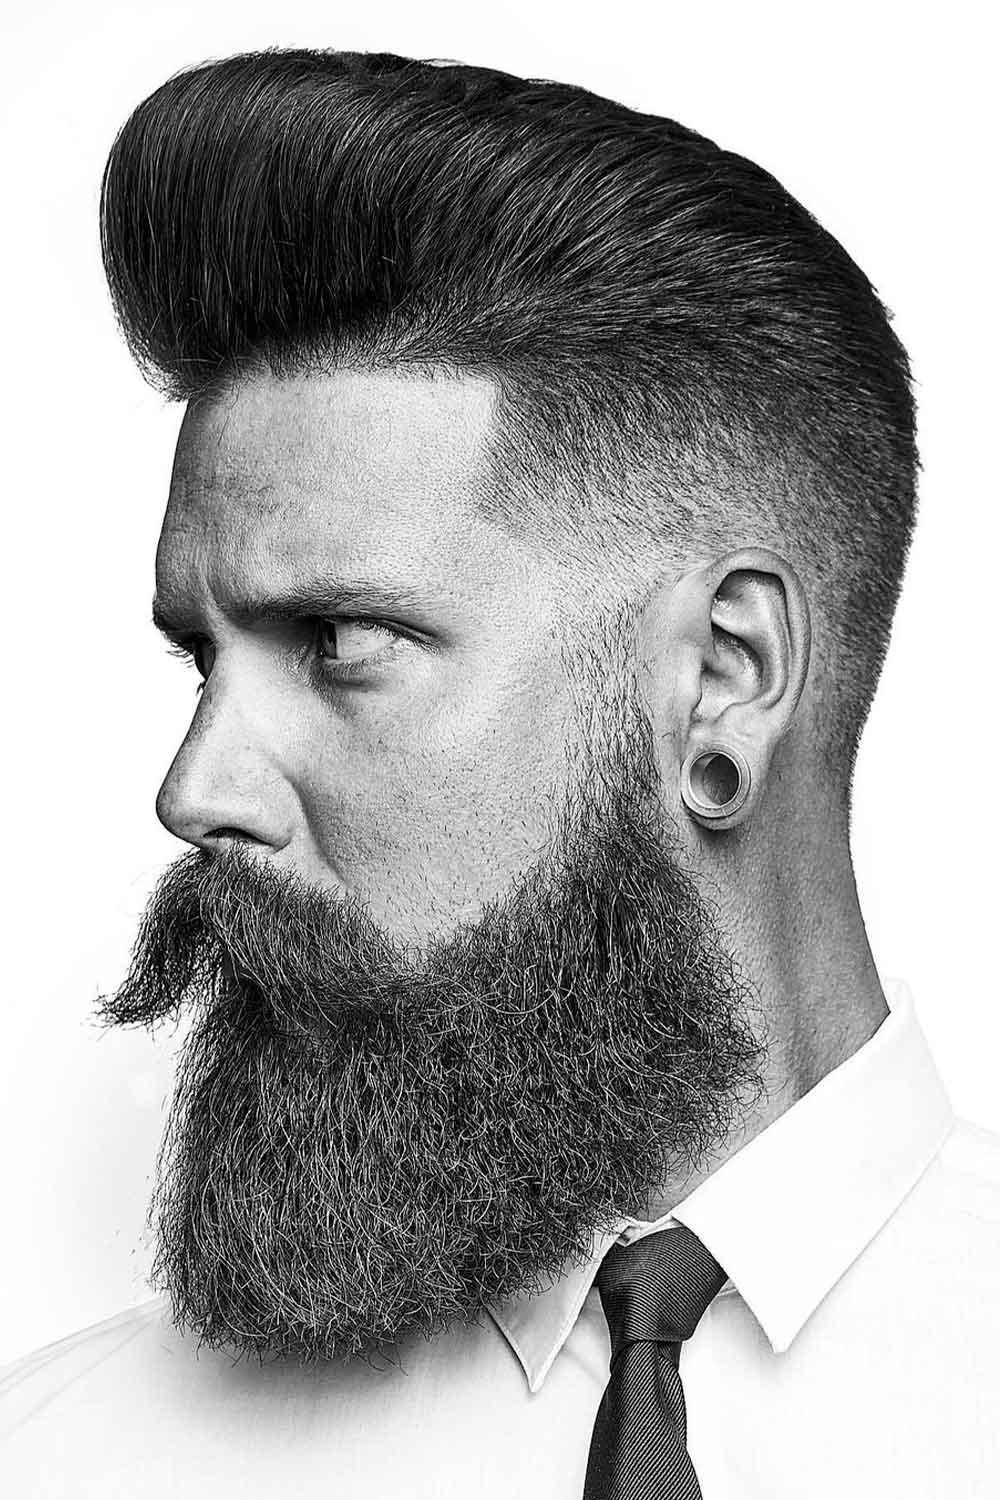 Hairstyles with Beard: 20 Matching Beard+Haircuts for Men